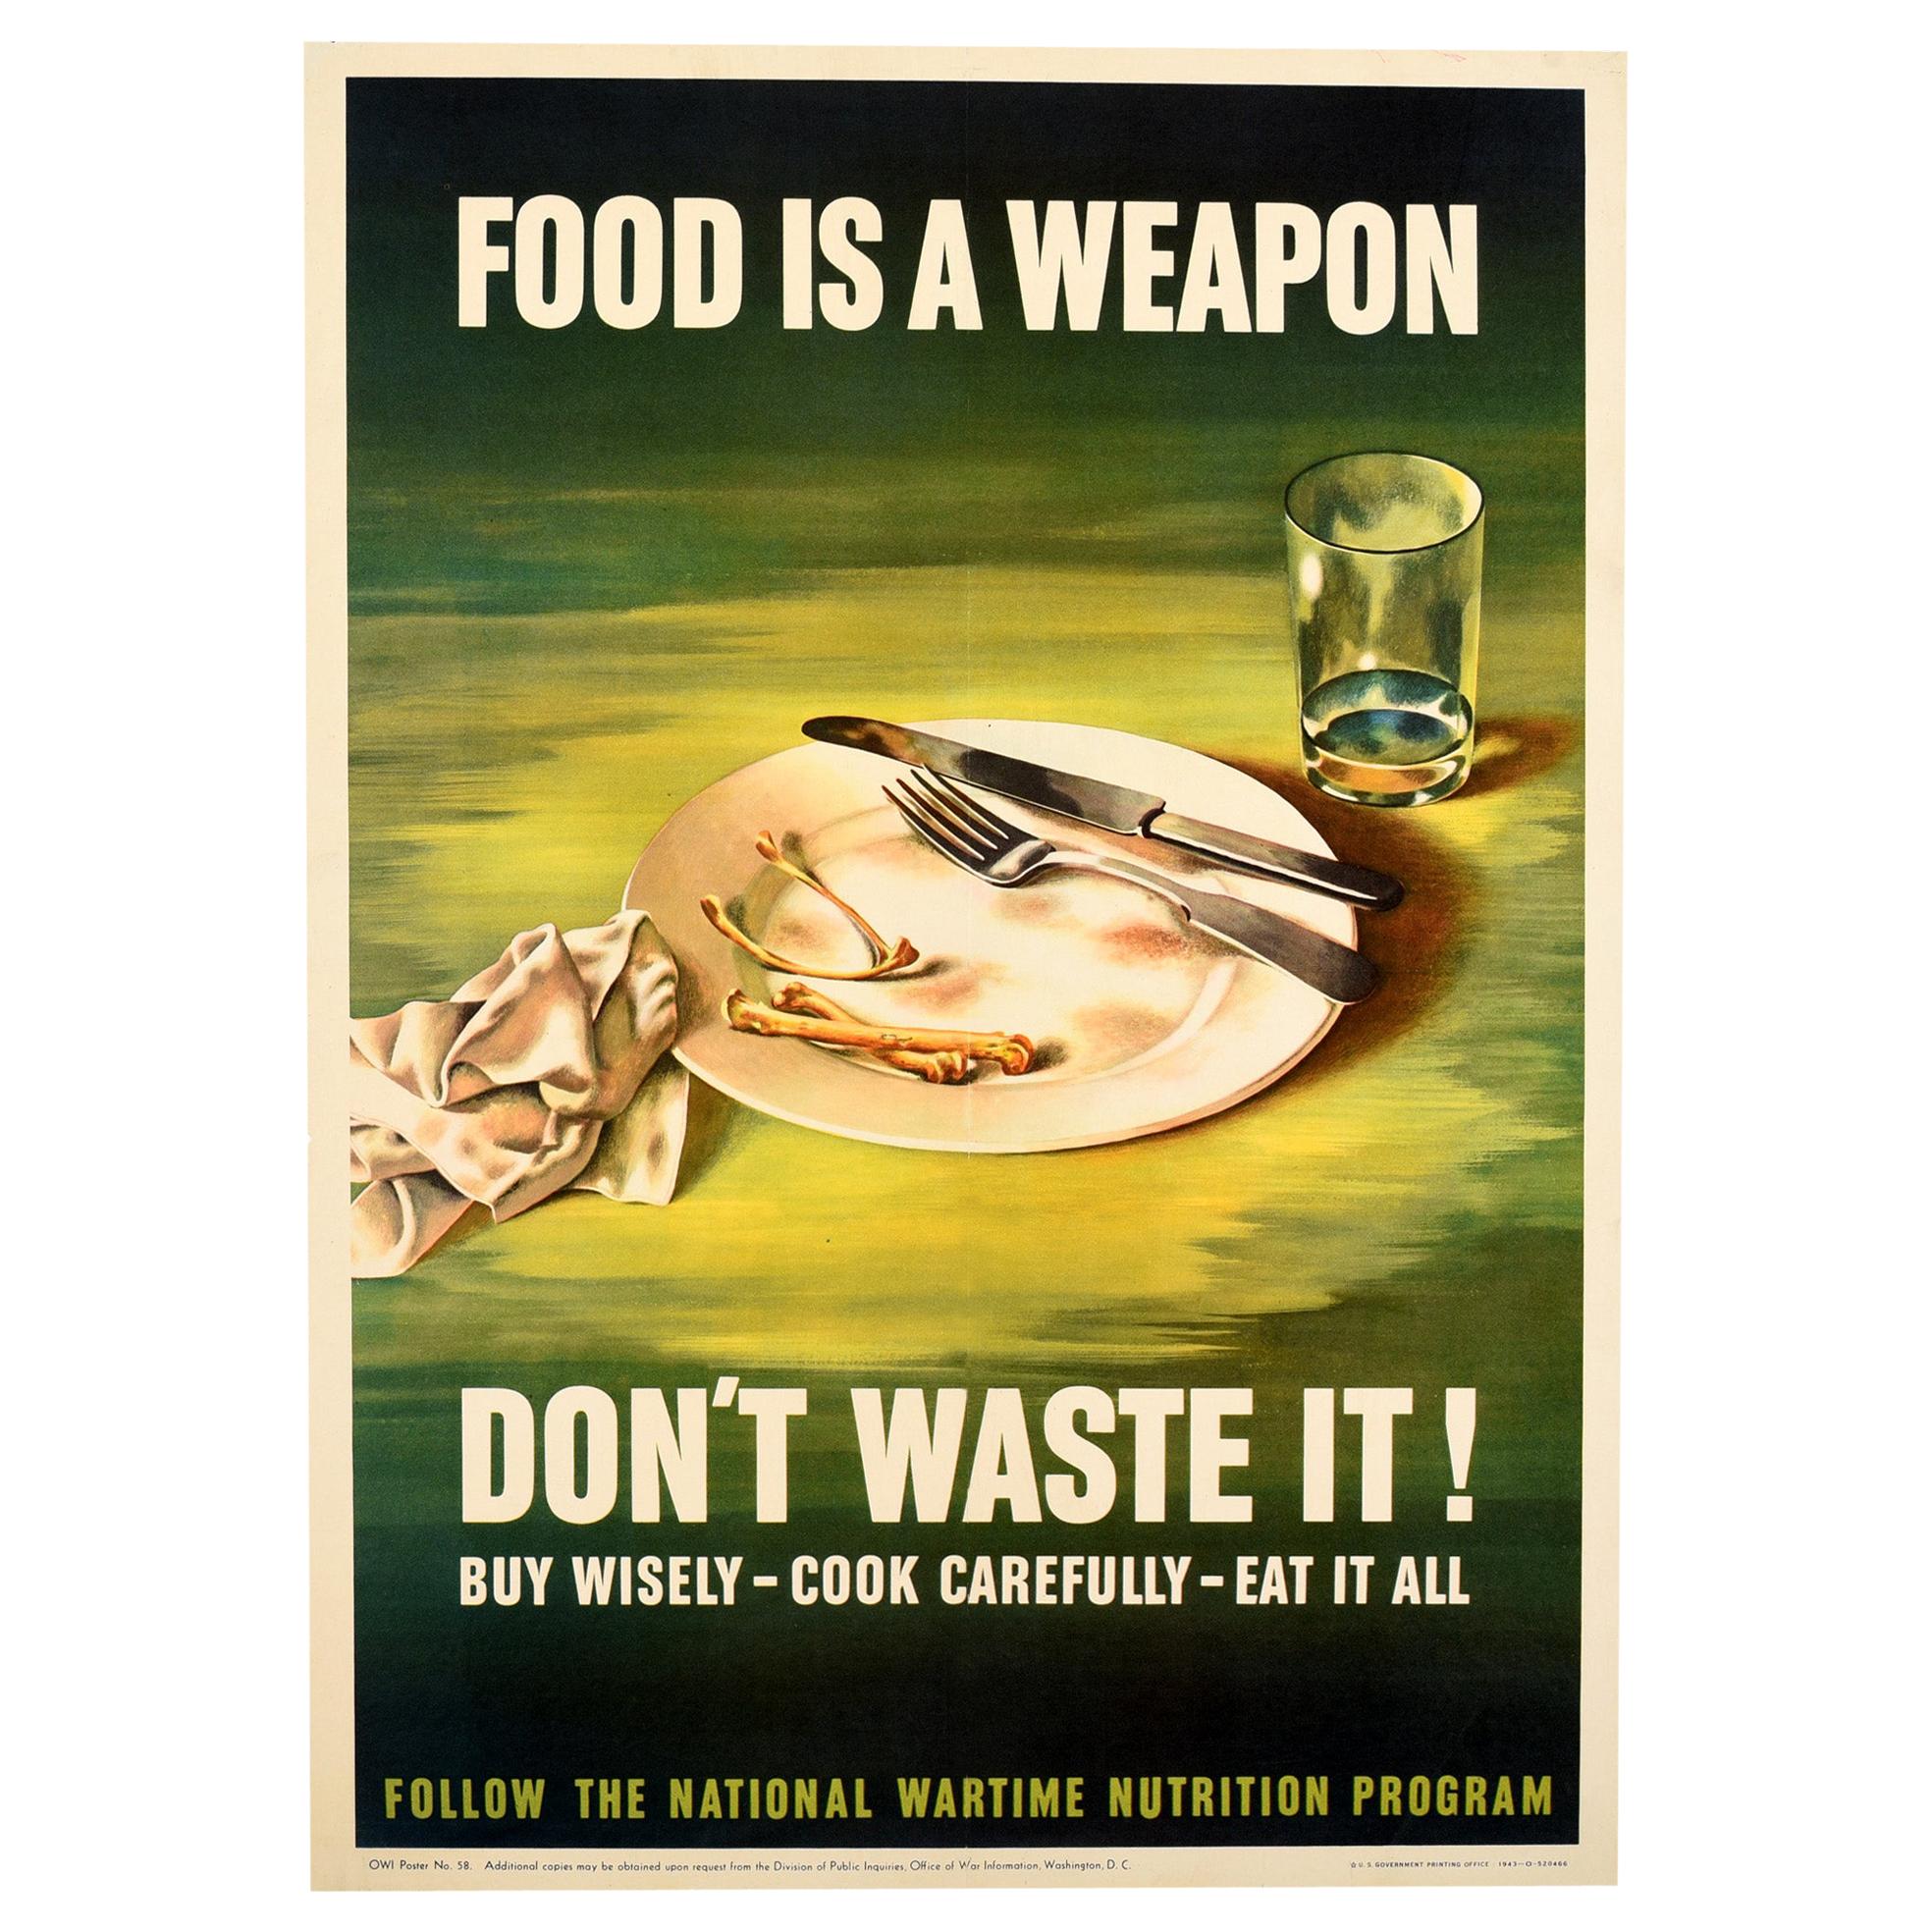 Original Vintage Poster Food Is A Weapon Don't Waste It WWII Wartime Nutrition